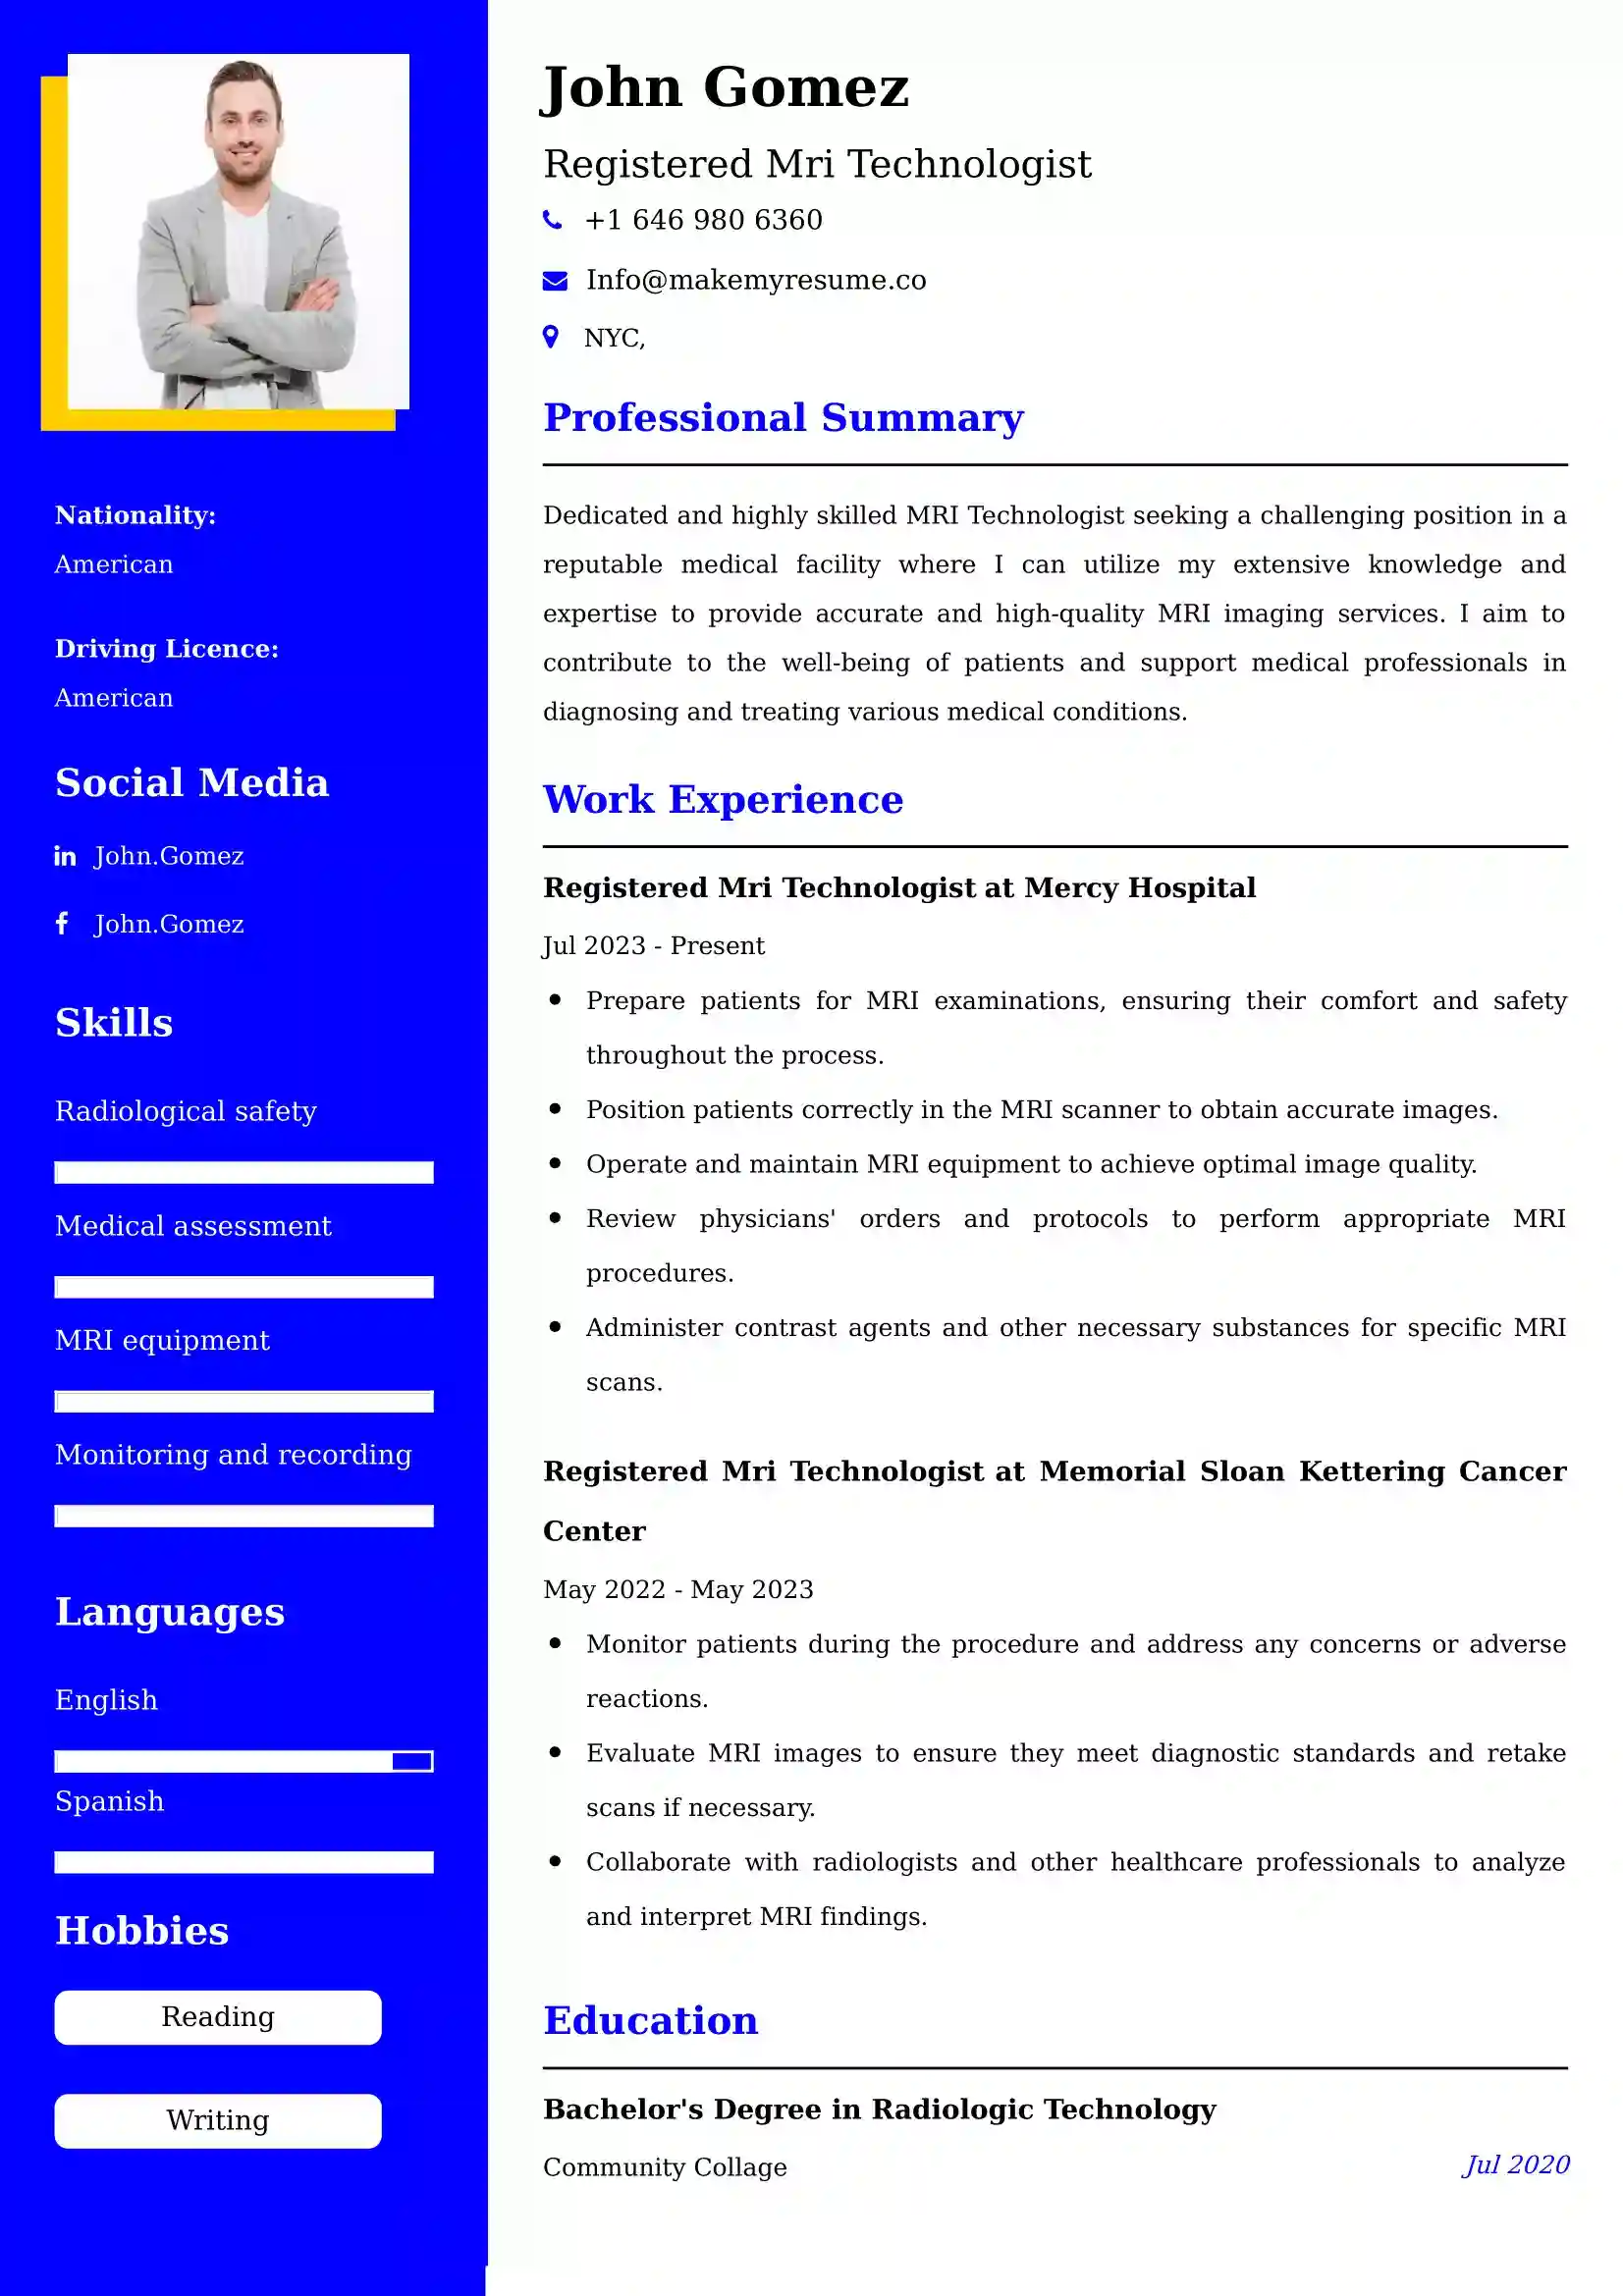 Registered Mri Technologist Resume Examples for UK Jobs - Tips and Guide